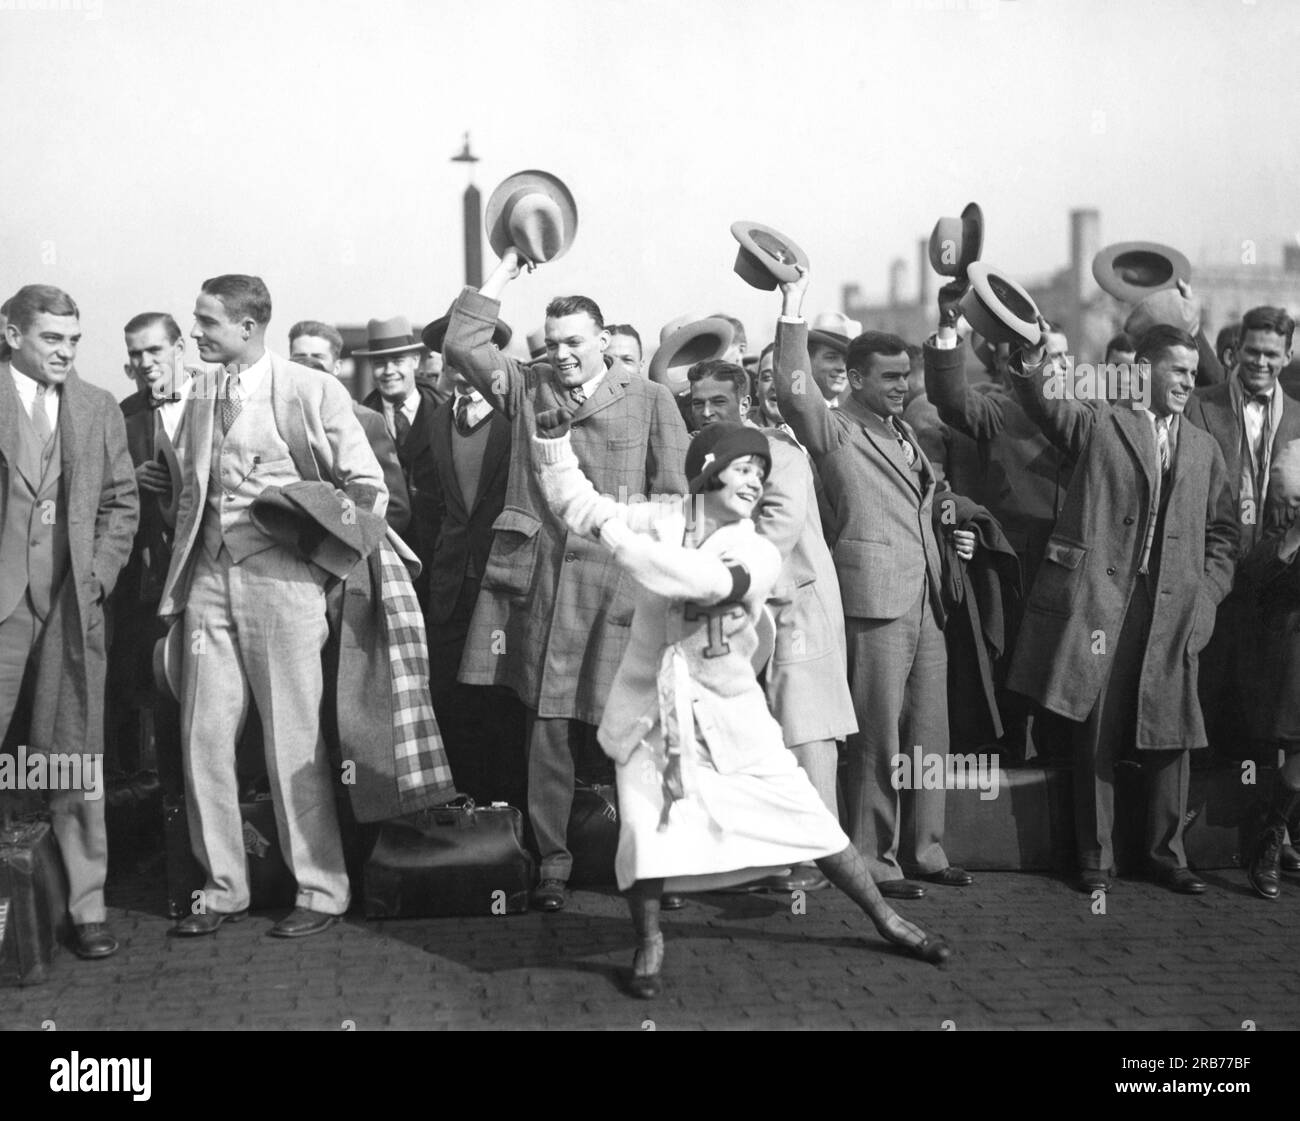 Chicago, Illinois:    October 23, 1925 The Tulane University football team along with former 'Follies Girl' cheerleader Marian Draper arrived at Chicago today to play Northwestern University at Stagg Field. Stagg was chosen for the game as it has twice the seating capacity as that at Evanston. Stock Photo